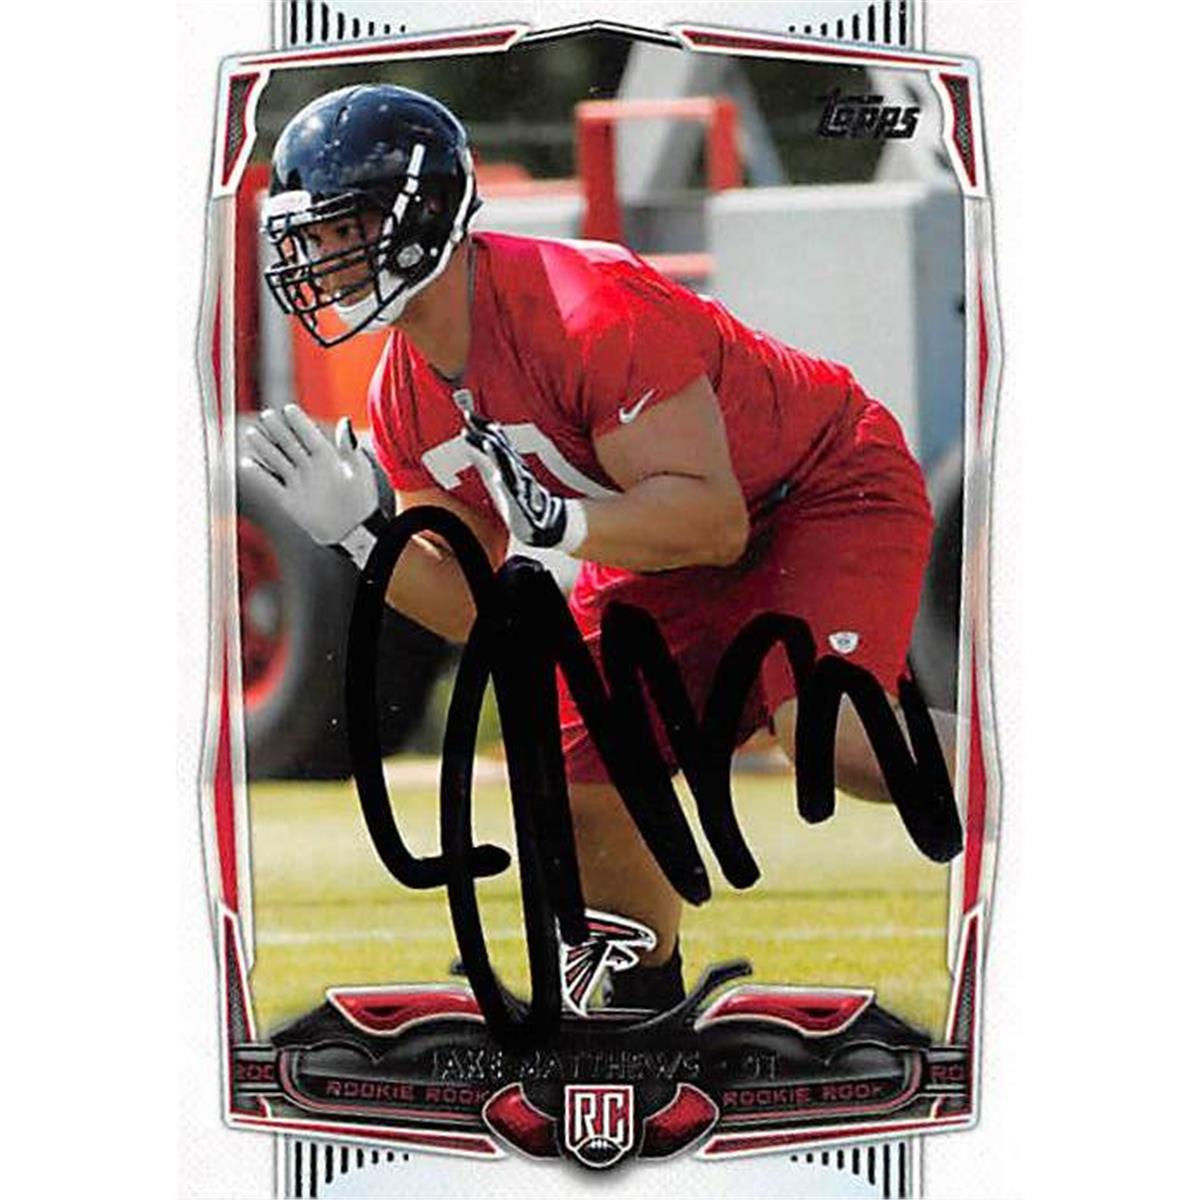 Picture of Autograph Warehouse 408843 Jake Matthews Autographed Football Card - Atlanta Falcons 2014 Topps No.345 Rookie